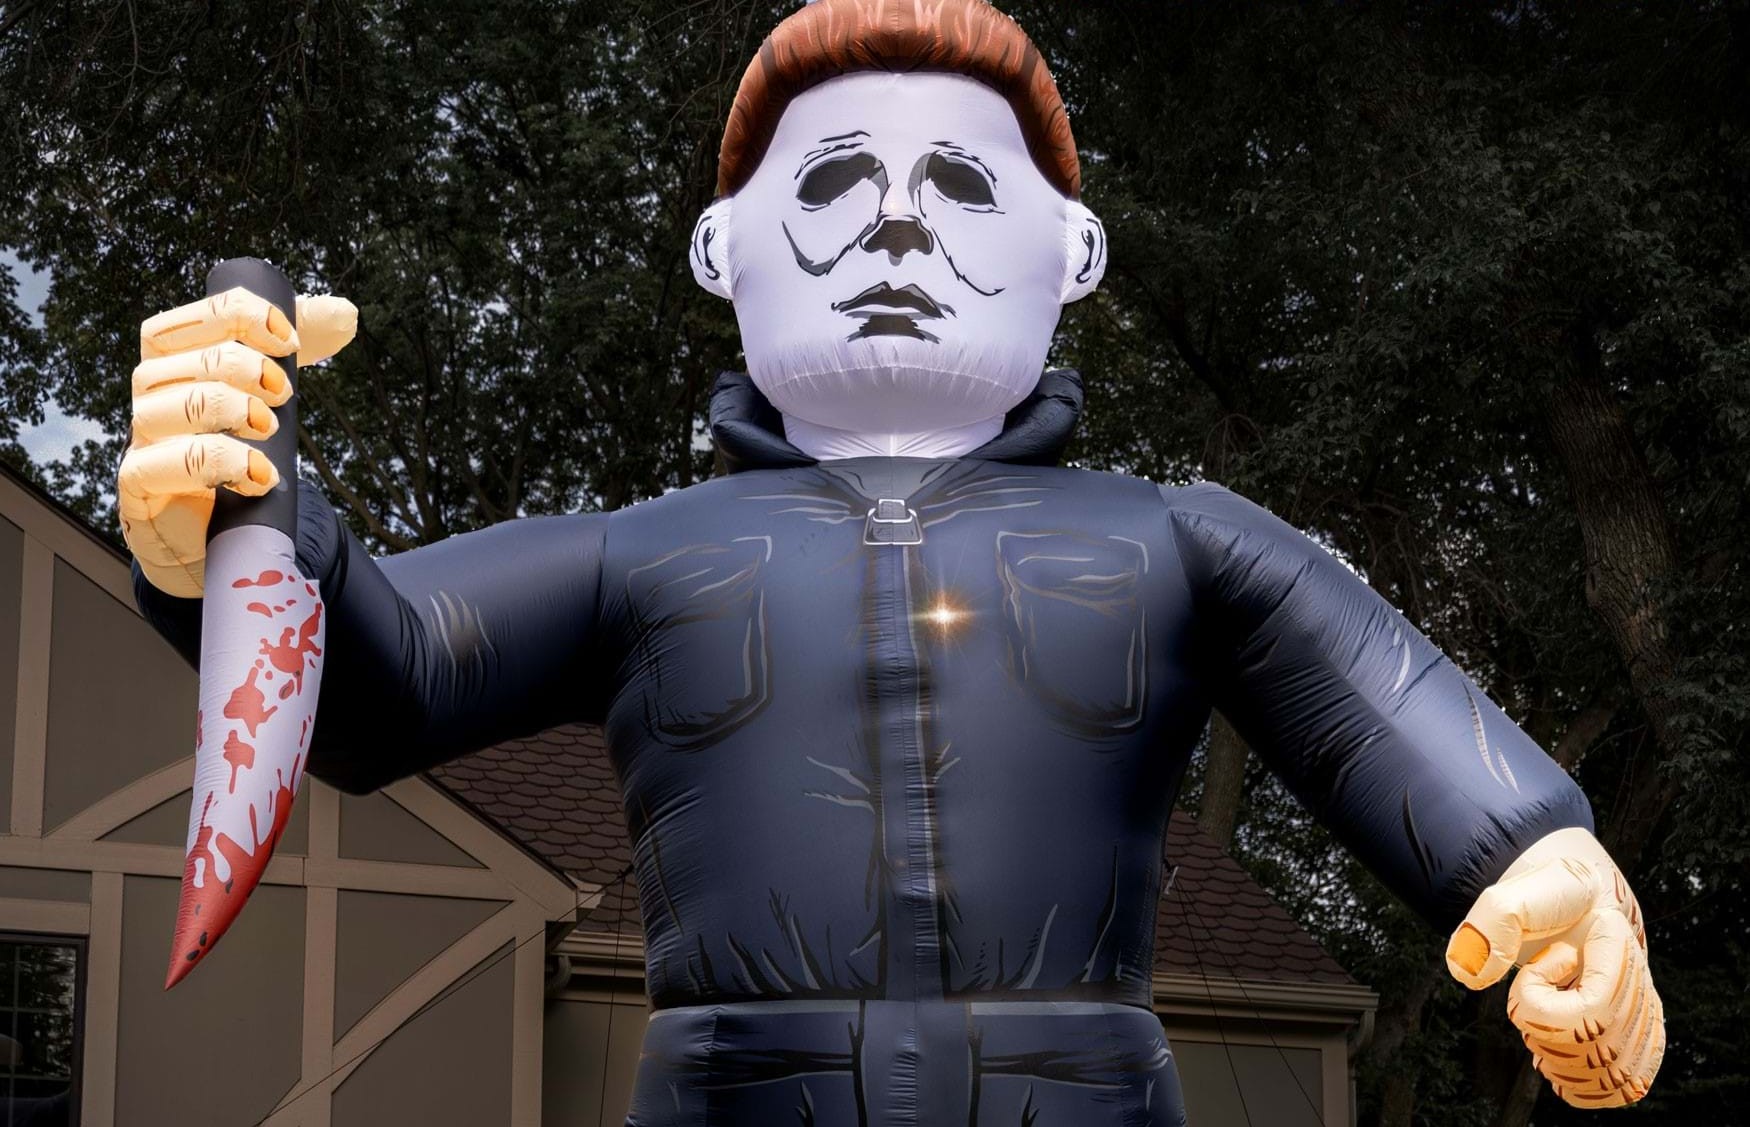 This 25-Foot Tall Michael Myers Inflatable Can Now Be Yours for $500